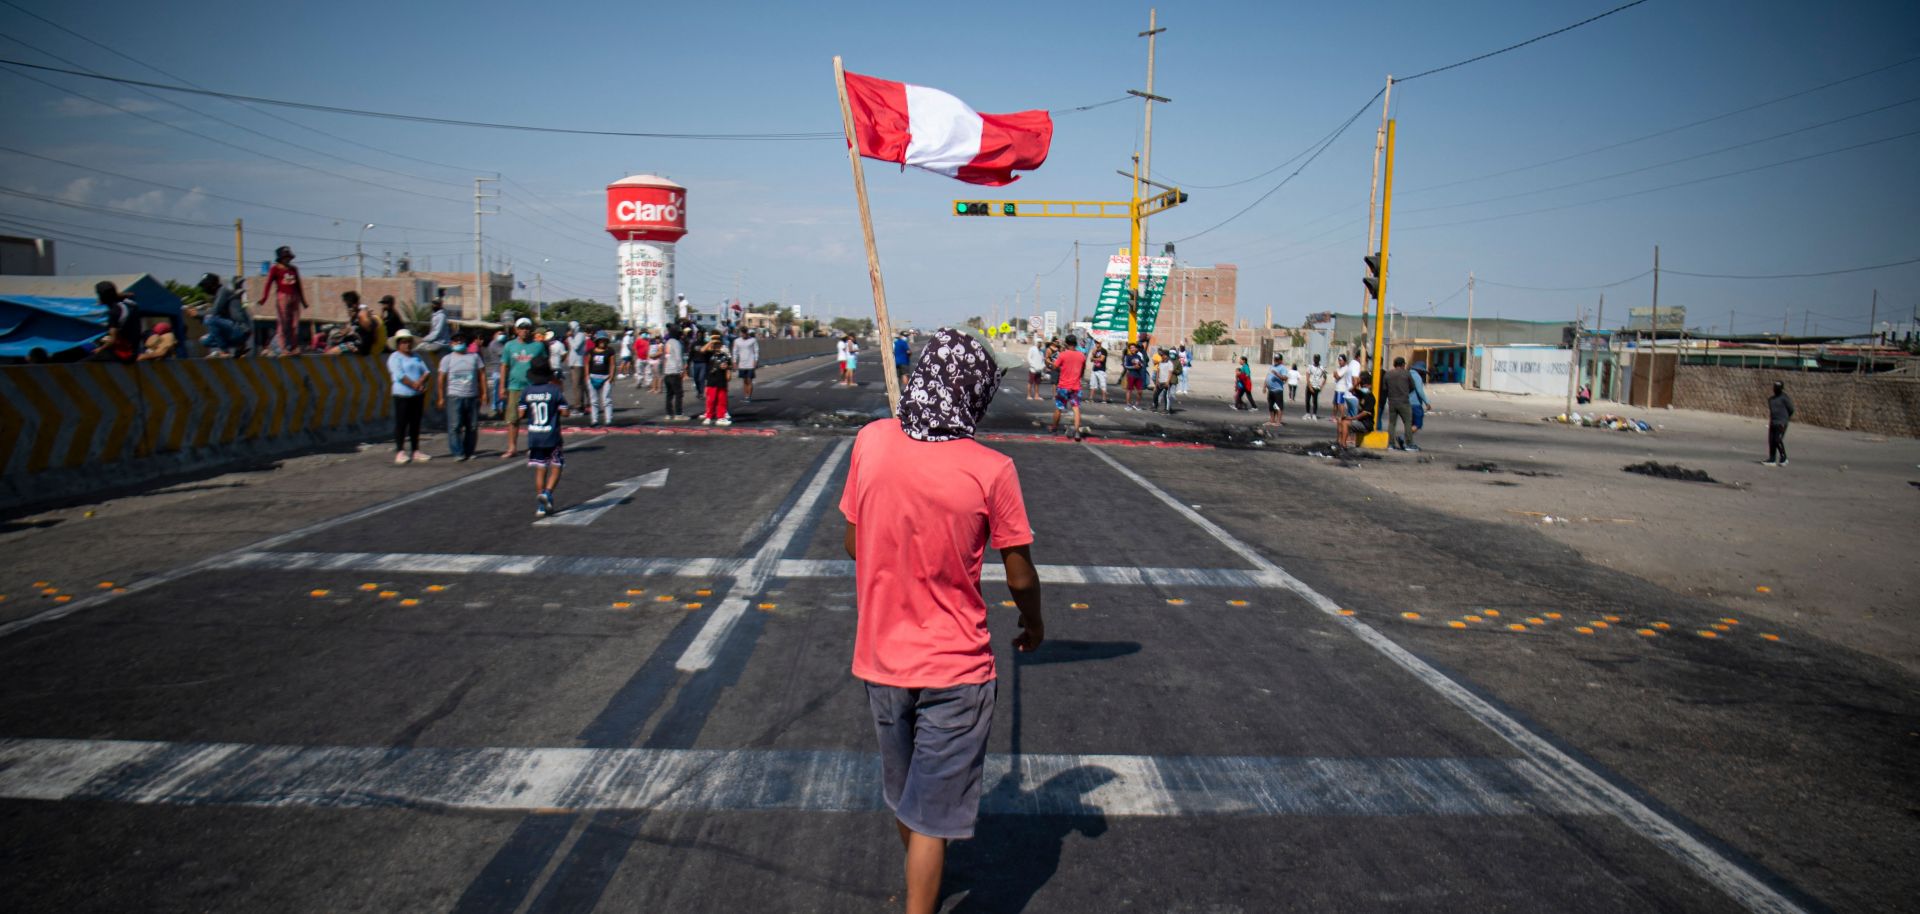 Demonstrators block a section of the Pan-American highway during a partial strike of cargo and passenger carriers in Ica, southern Peru, on April 4, 2022.